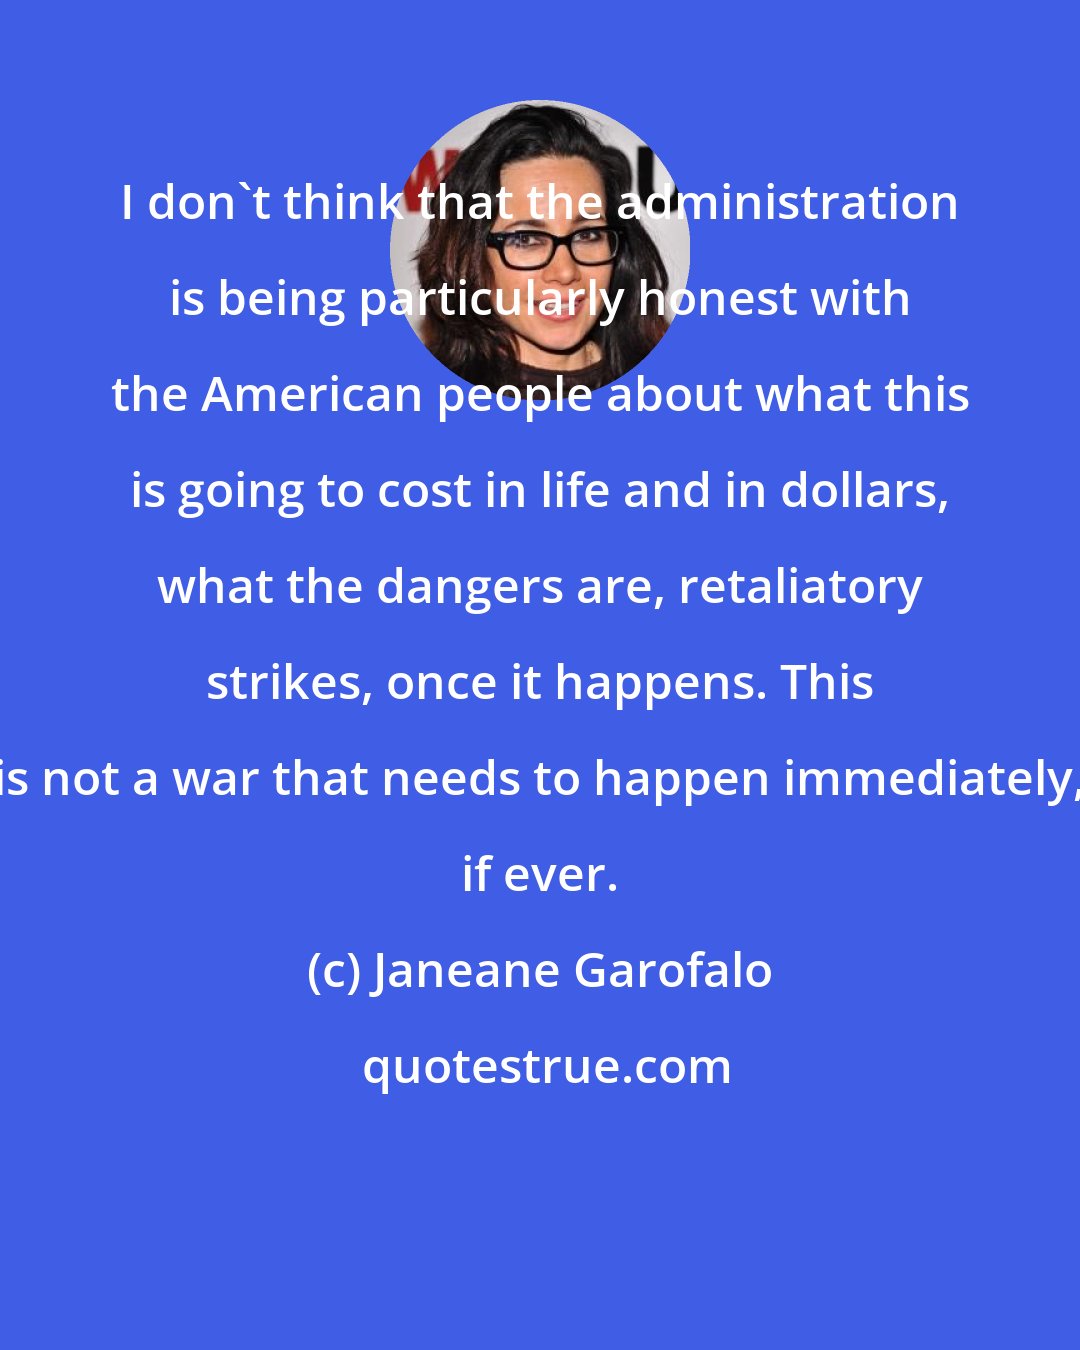 Janeane Garofalo: I don't think that the administration is being particularly honest with the American people about what this is going to cost in life and in dollars, what the dangers are, retaliatory strikes, once it happens. This is not a war that needs to happen immediately, if ever.